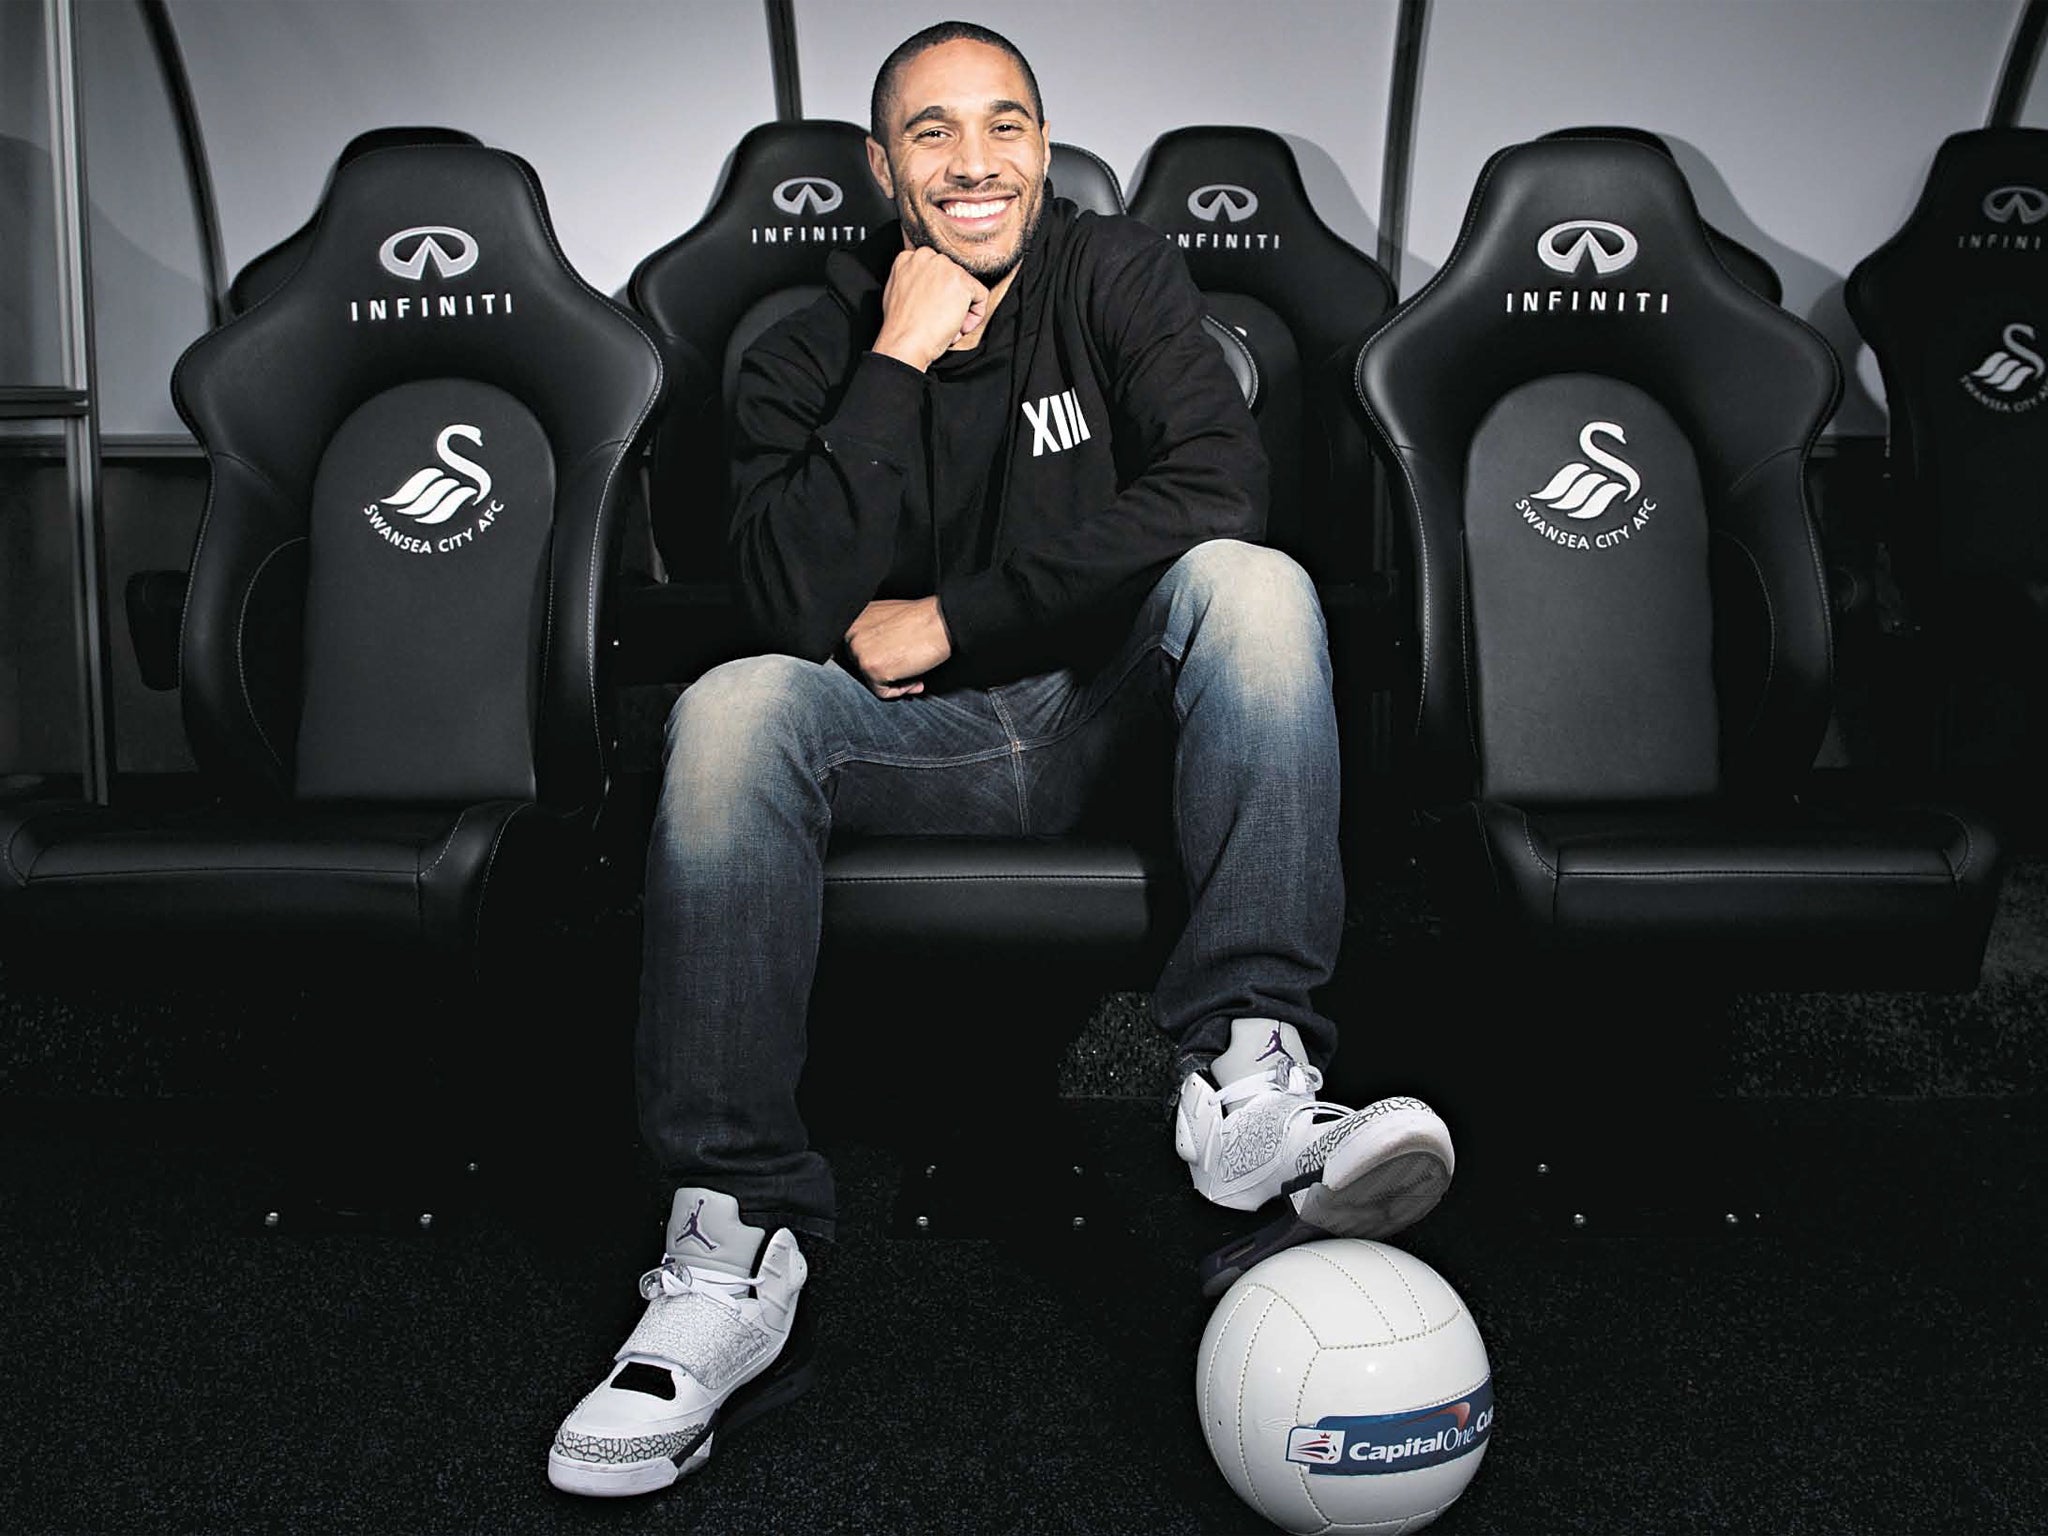 Swansea captain Ashley Williams tells Sam Wallace about his journey from working at Beefeater to tomorrow’s League Cup final – via his infamous clash with RVP